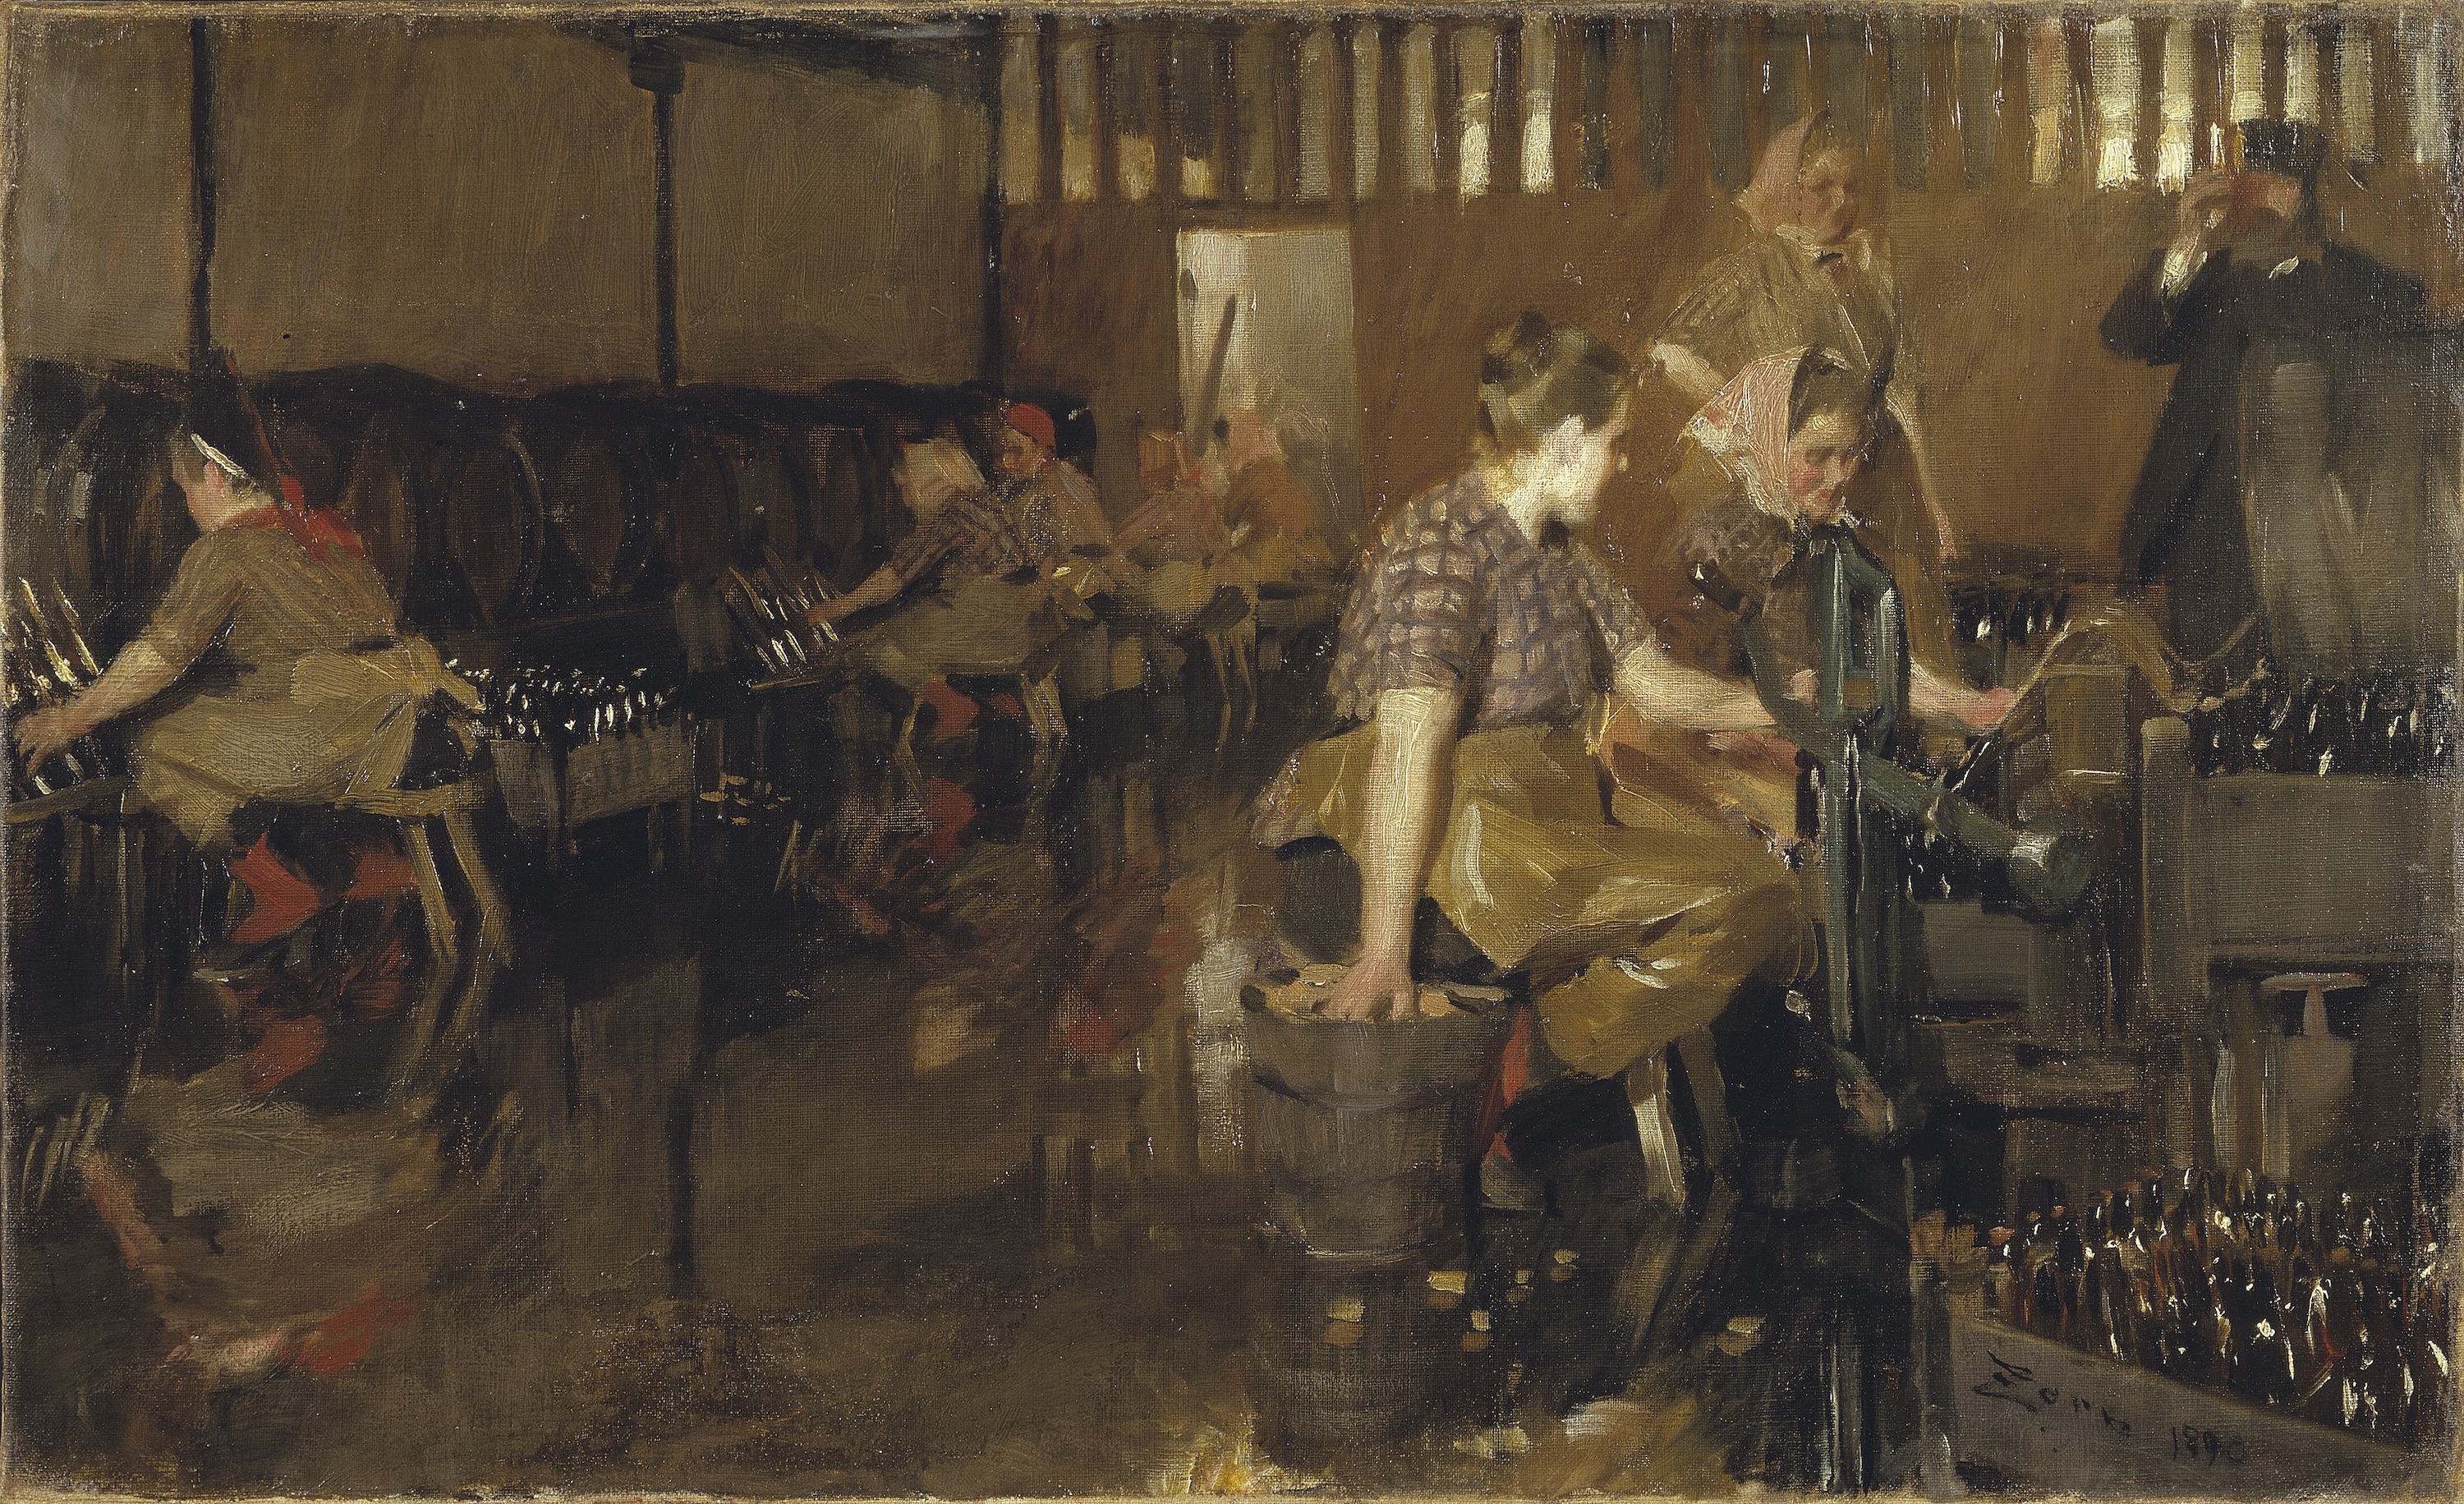 The Little Brewery by Anders Zorn - 1890 - 47,5 x 78 cm Europeana